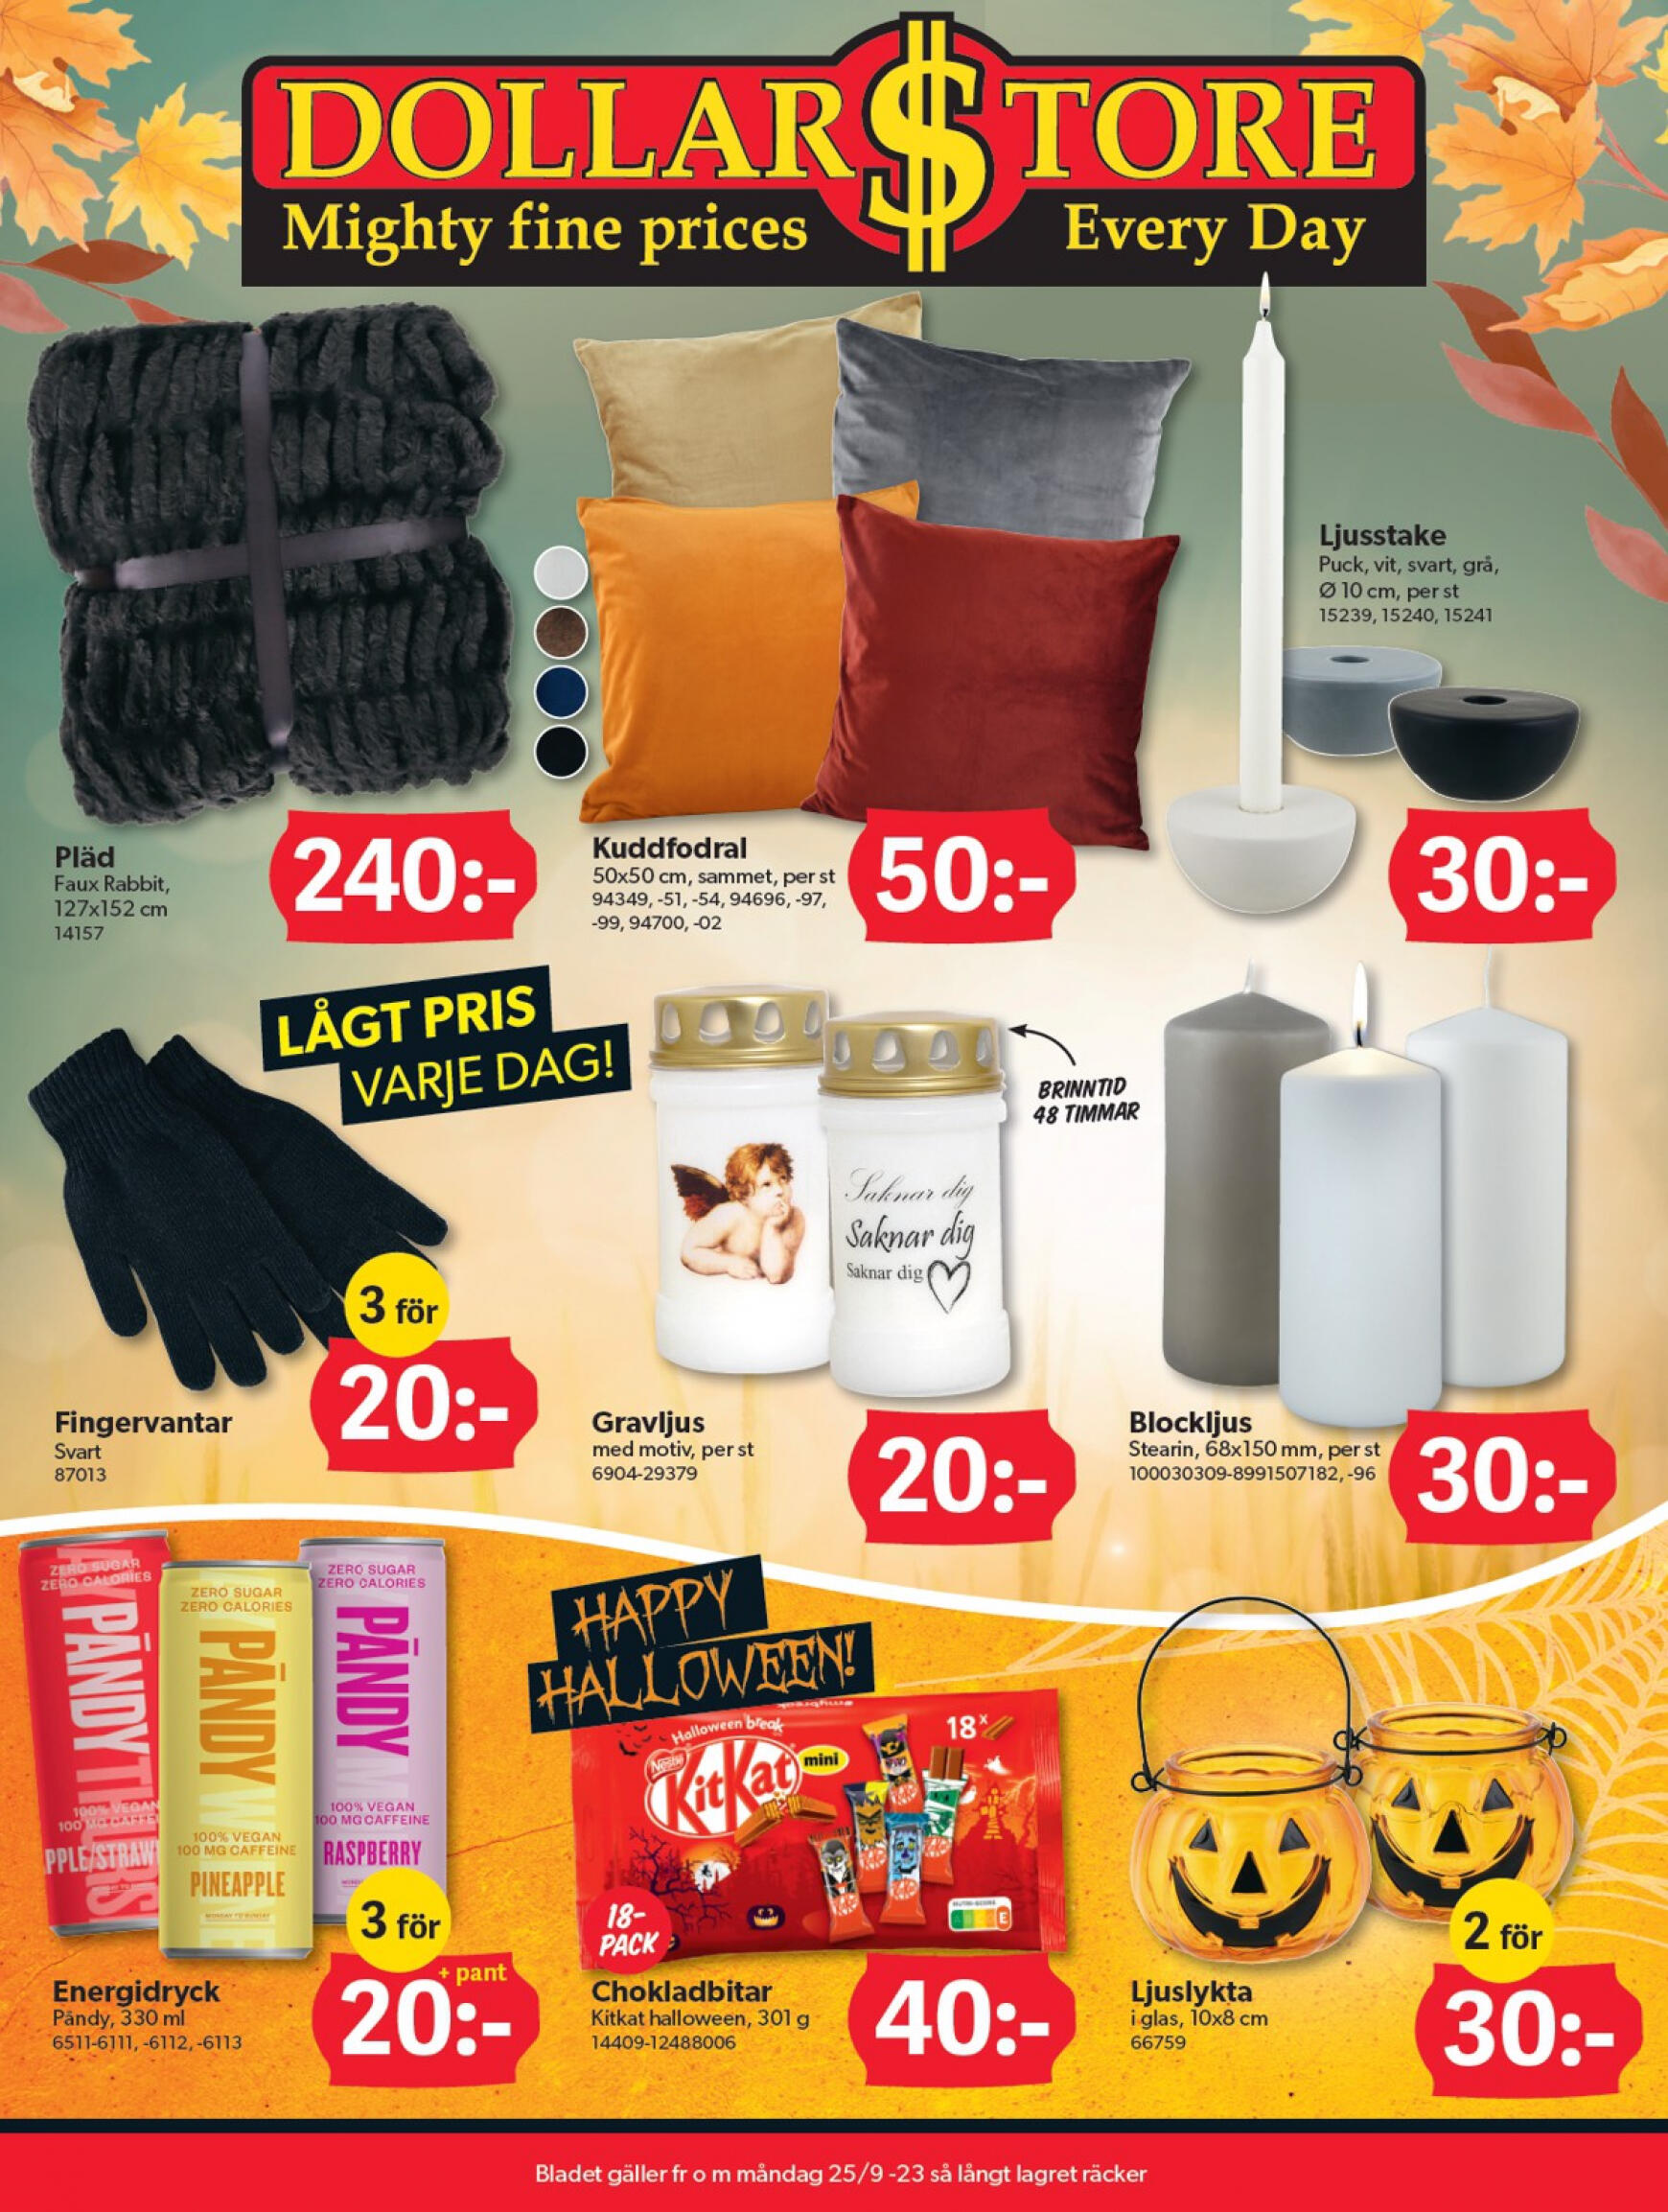 dollar-store - Dollarstore - September - page: 1